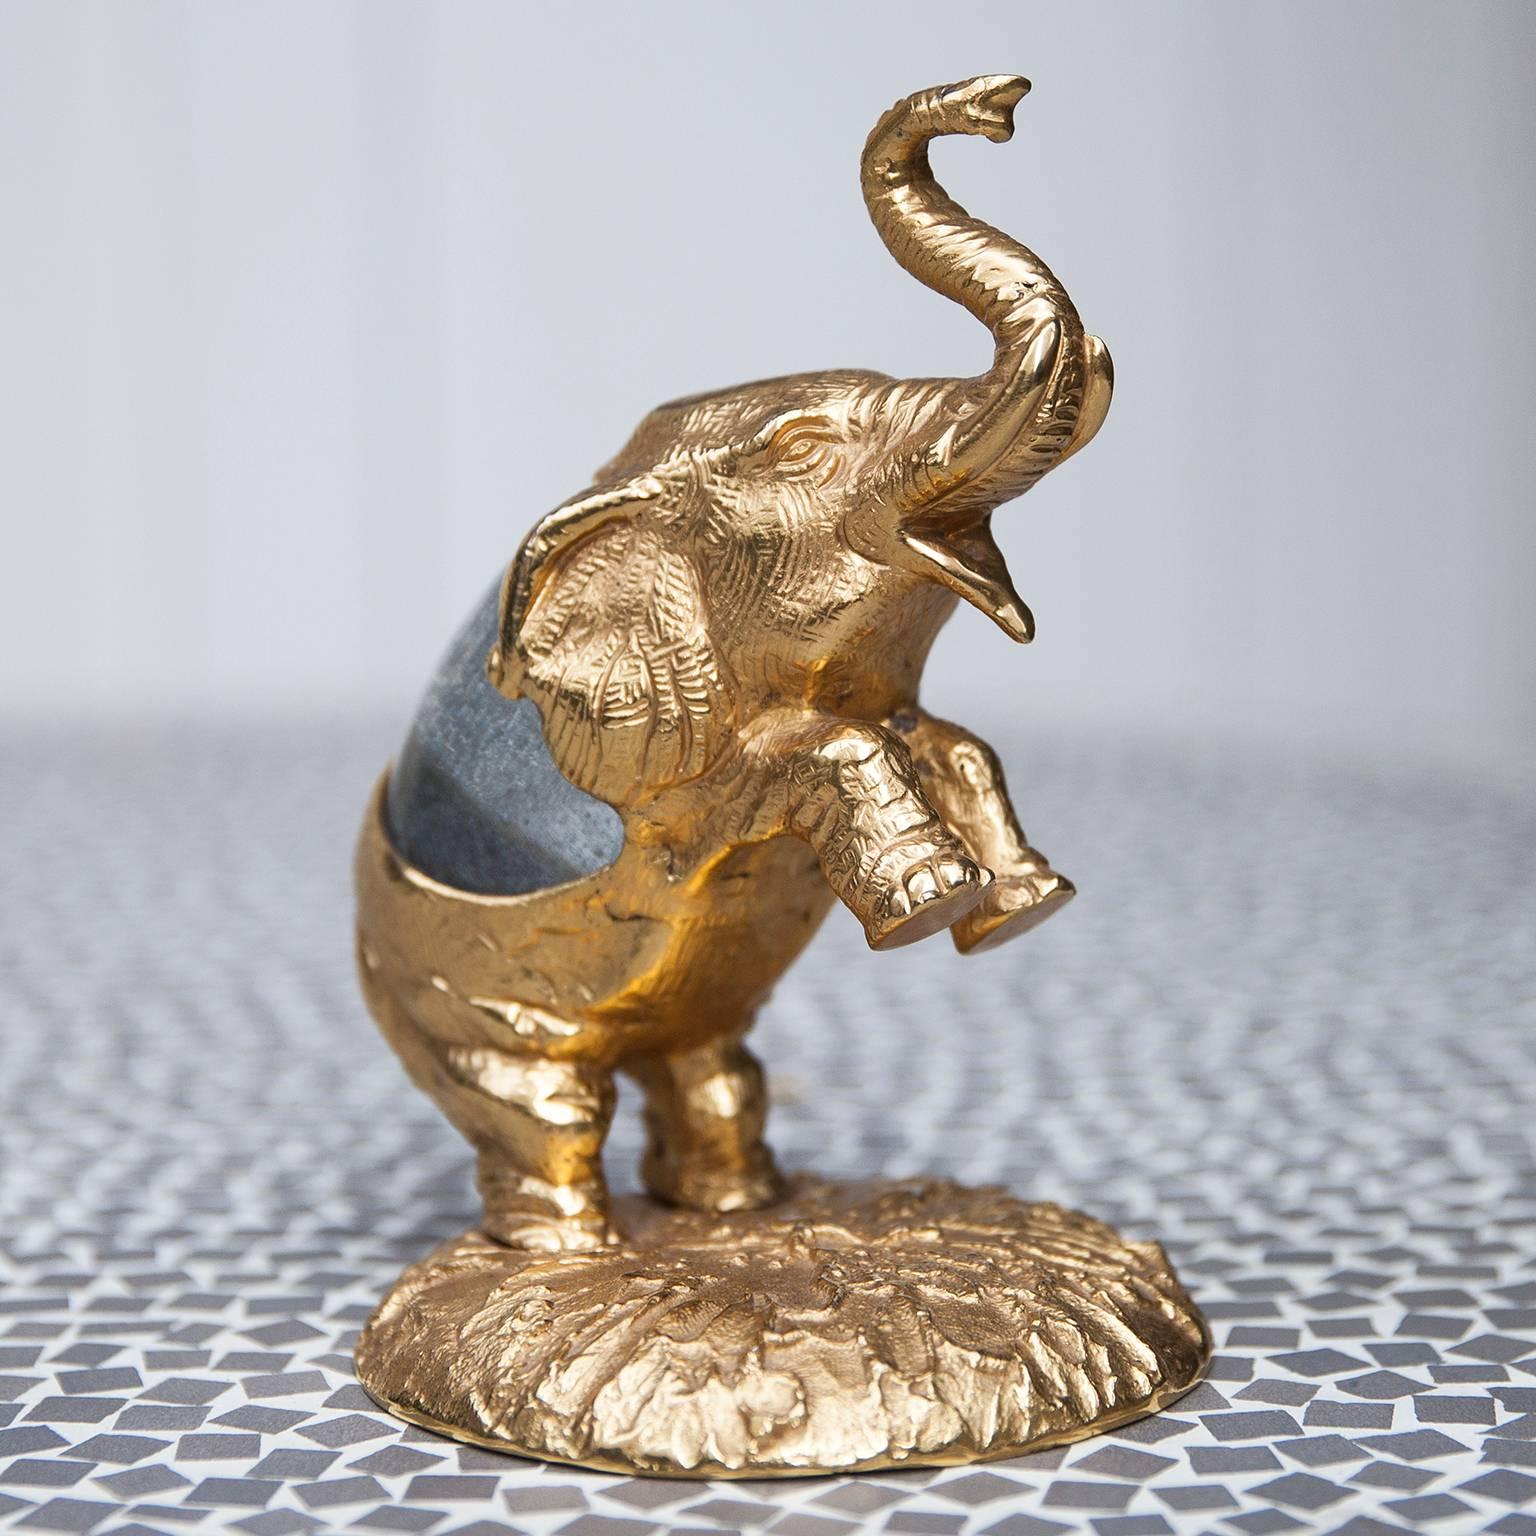 Gorgeous detailed gold plated bronze elephant sculpture by Gabriella Crespi from the 1970s. The central body is composed of a Murano glass egg. Signed on the bottom.
This piece is in excellent condition.
Measure: 16 H x 13 B x 10.8 D cm.